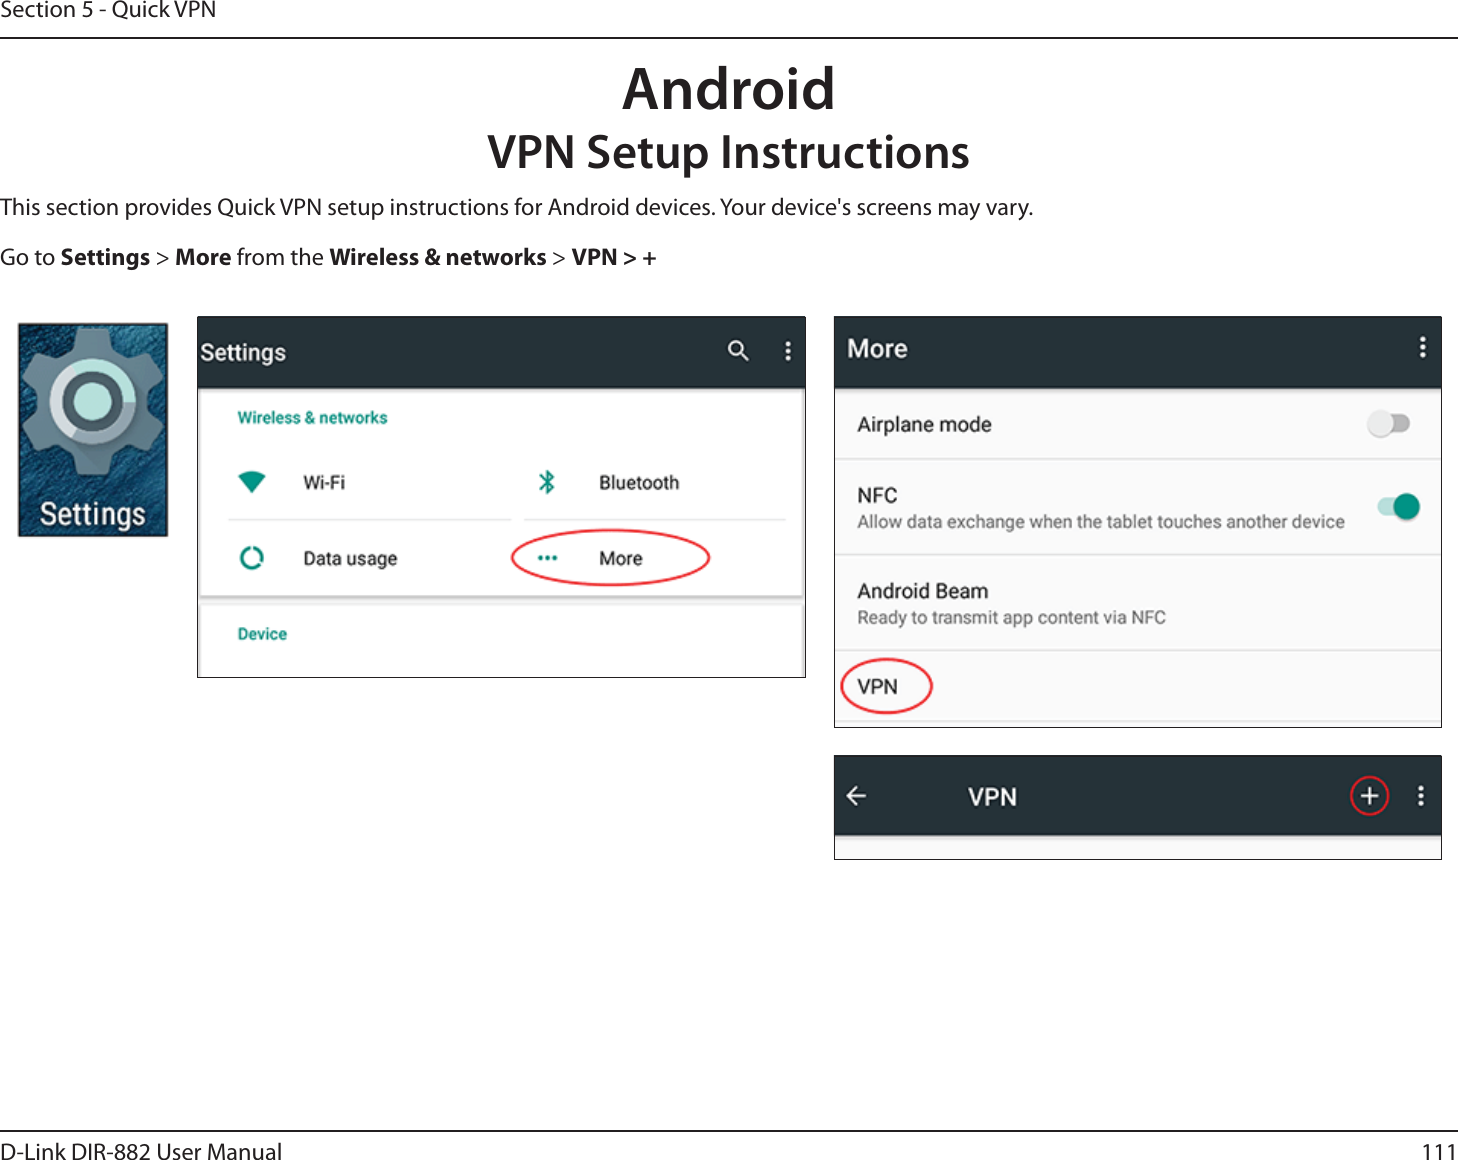 111D-Link DIR-882 User ManualSection 5 - Quick VPNThis section provides Quick VPN setup instructions for Android devices. Your device&apos;s screens may vary.Go to Settings &gt; More from the Wireless &amp; networks &gt; 71/AndroidVPN Setup Instructions